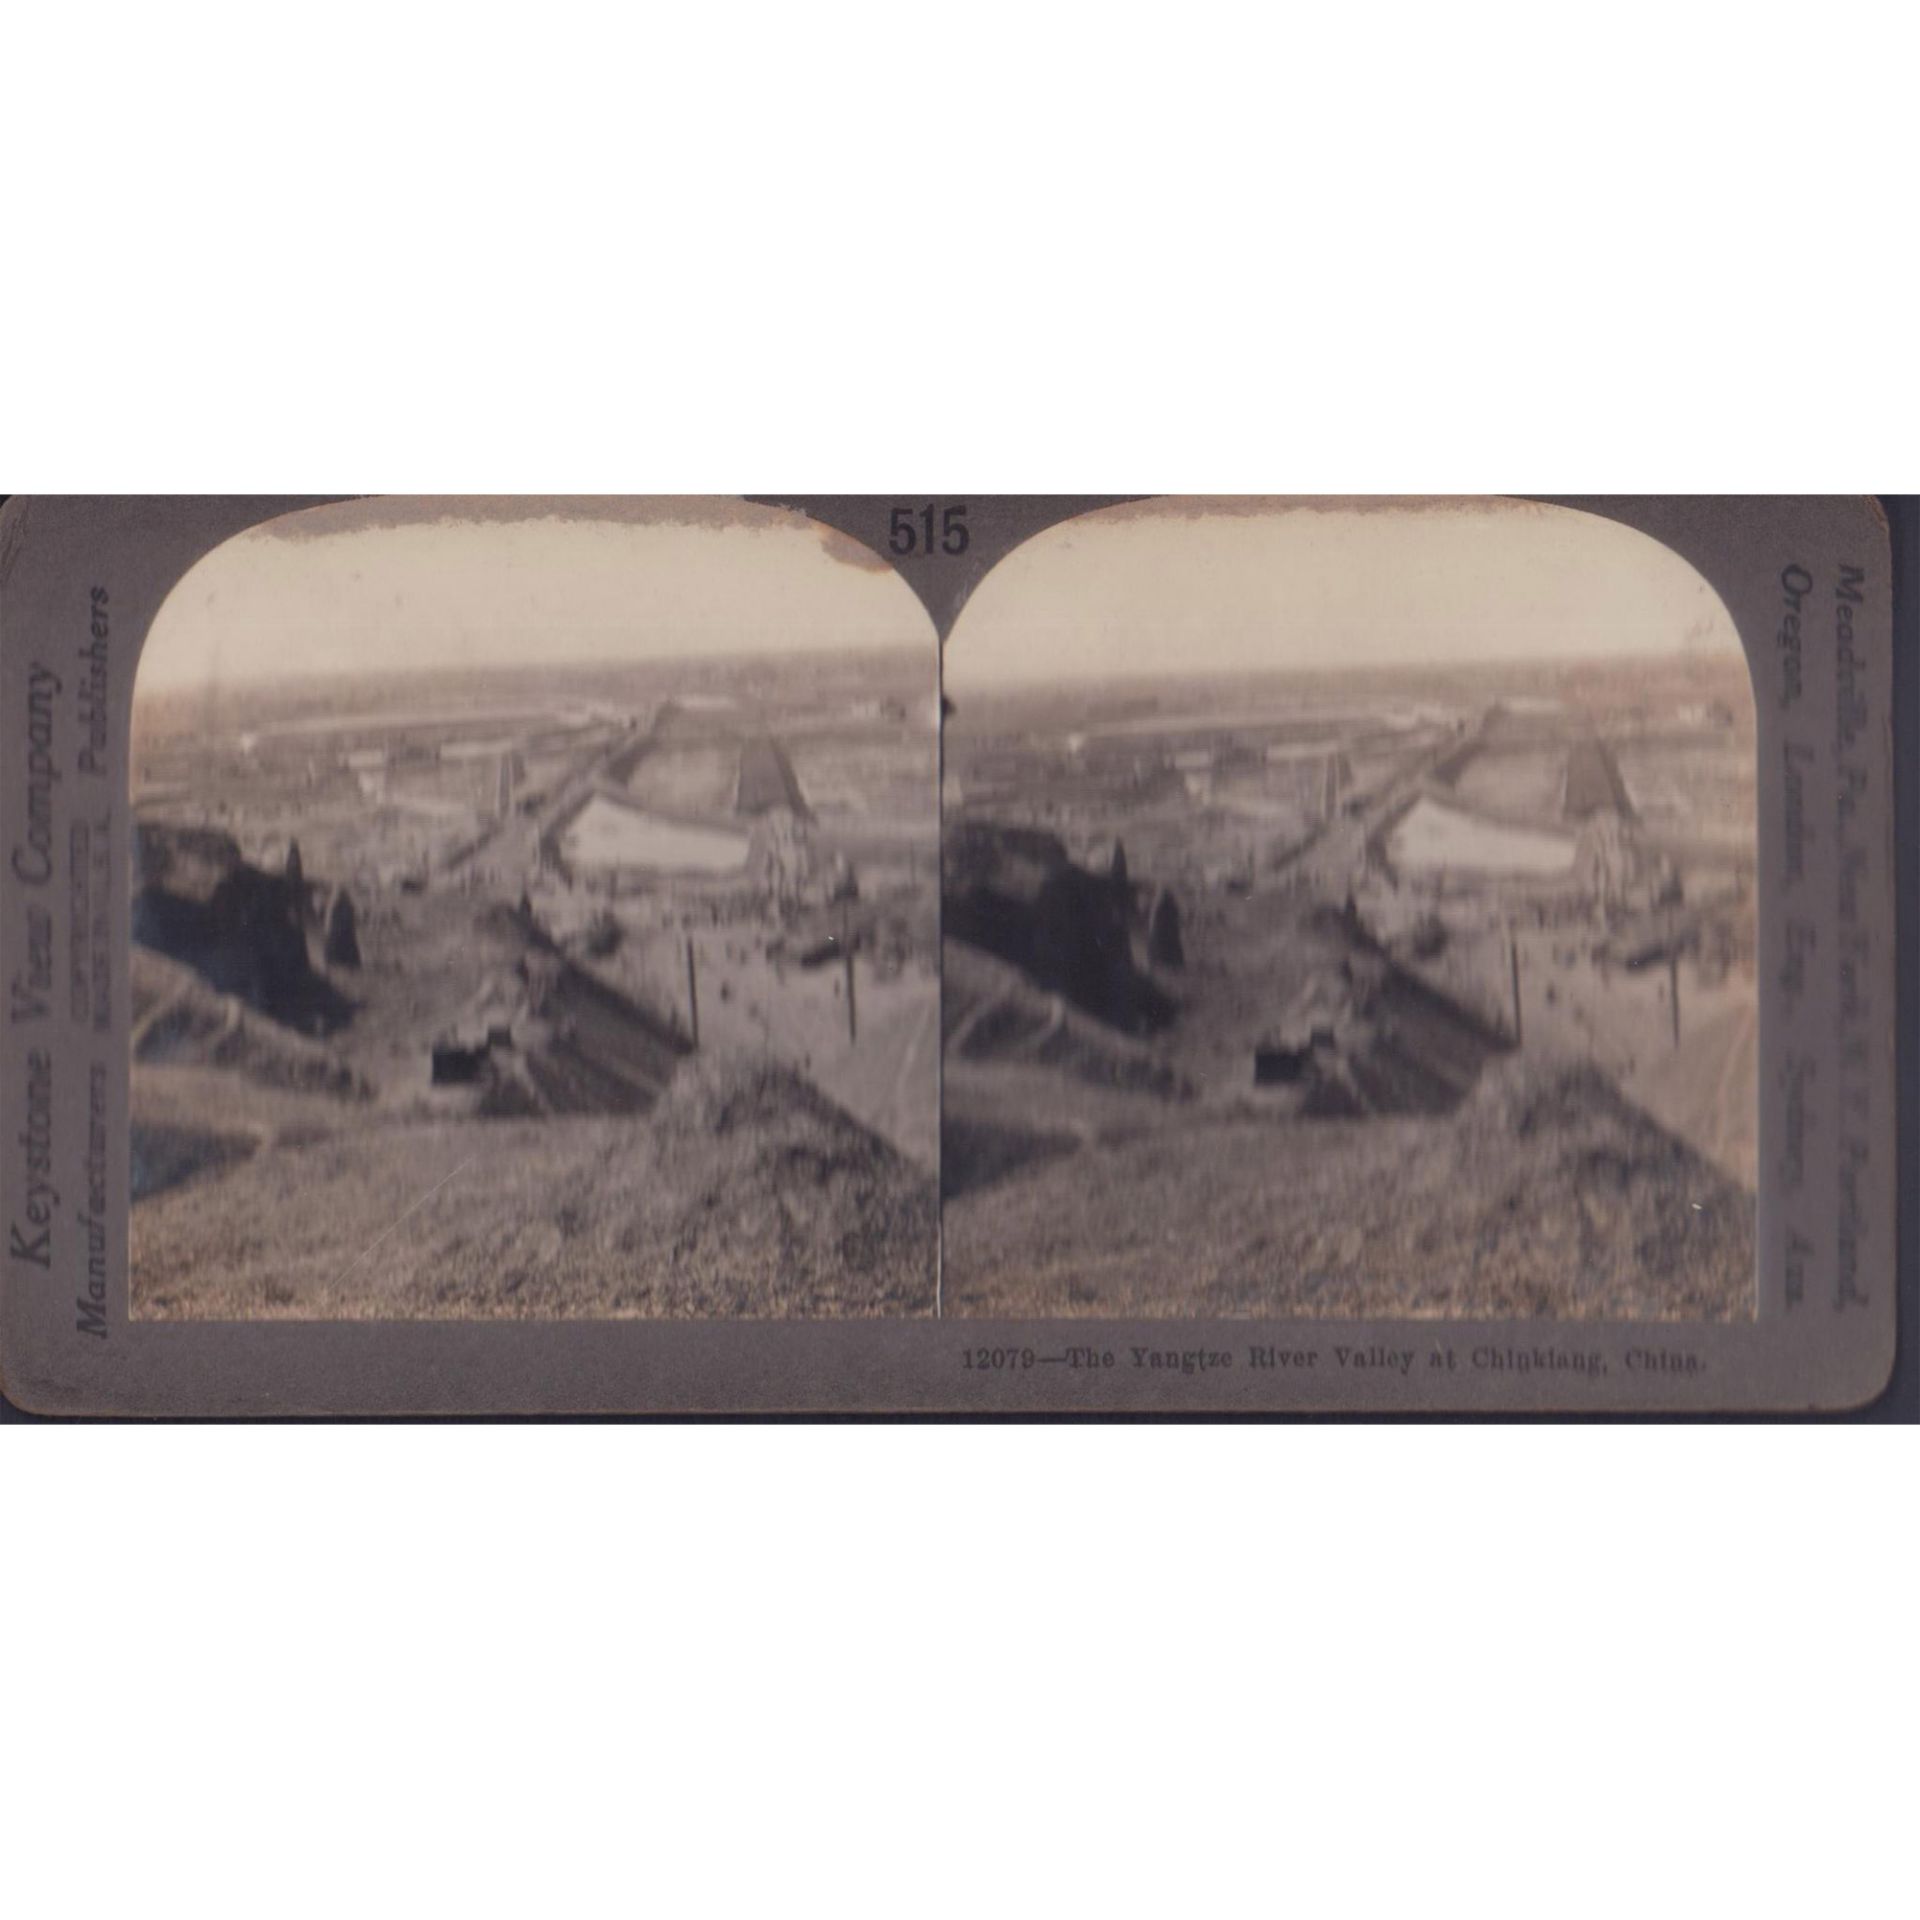 Set of Antique Stereoscopic Sepia & Color Photographs - Image 7 of 7